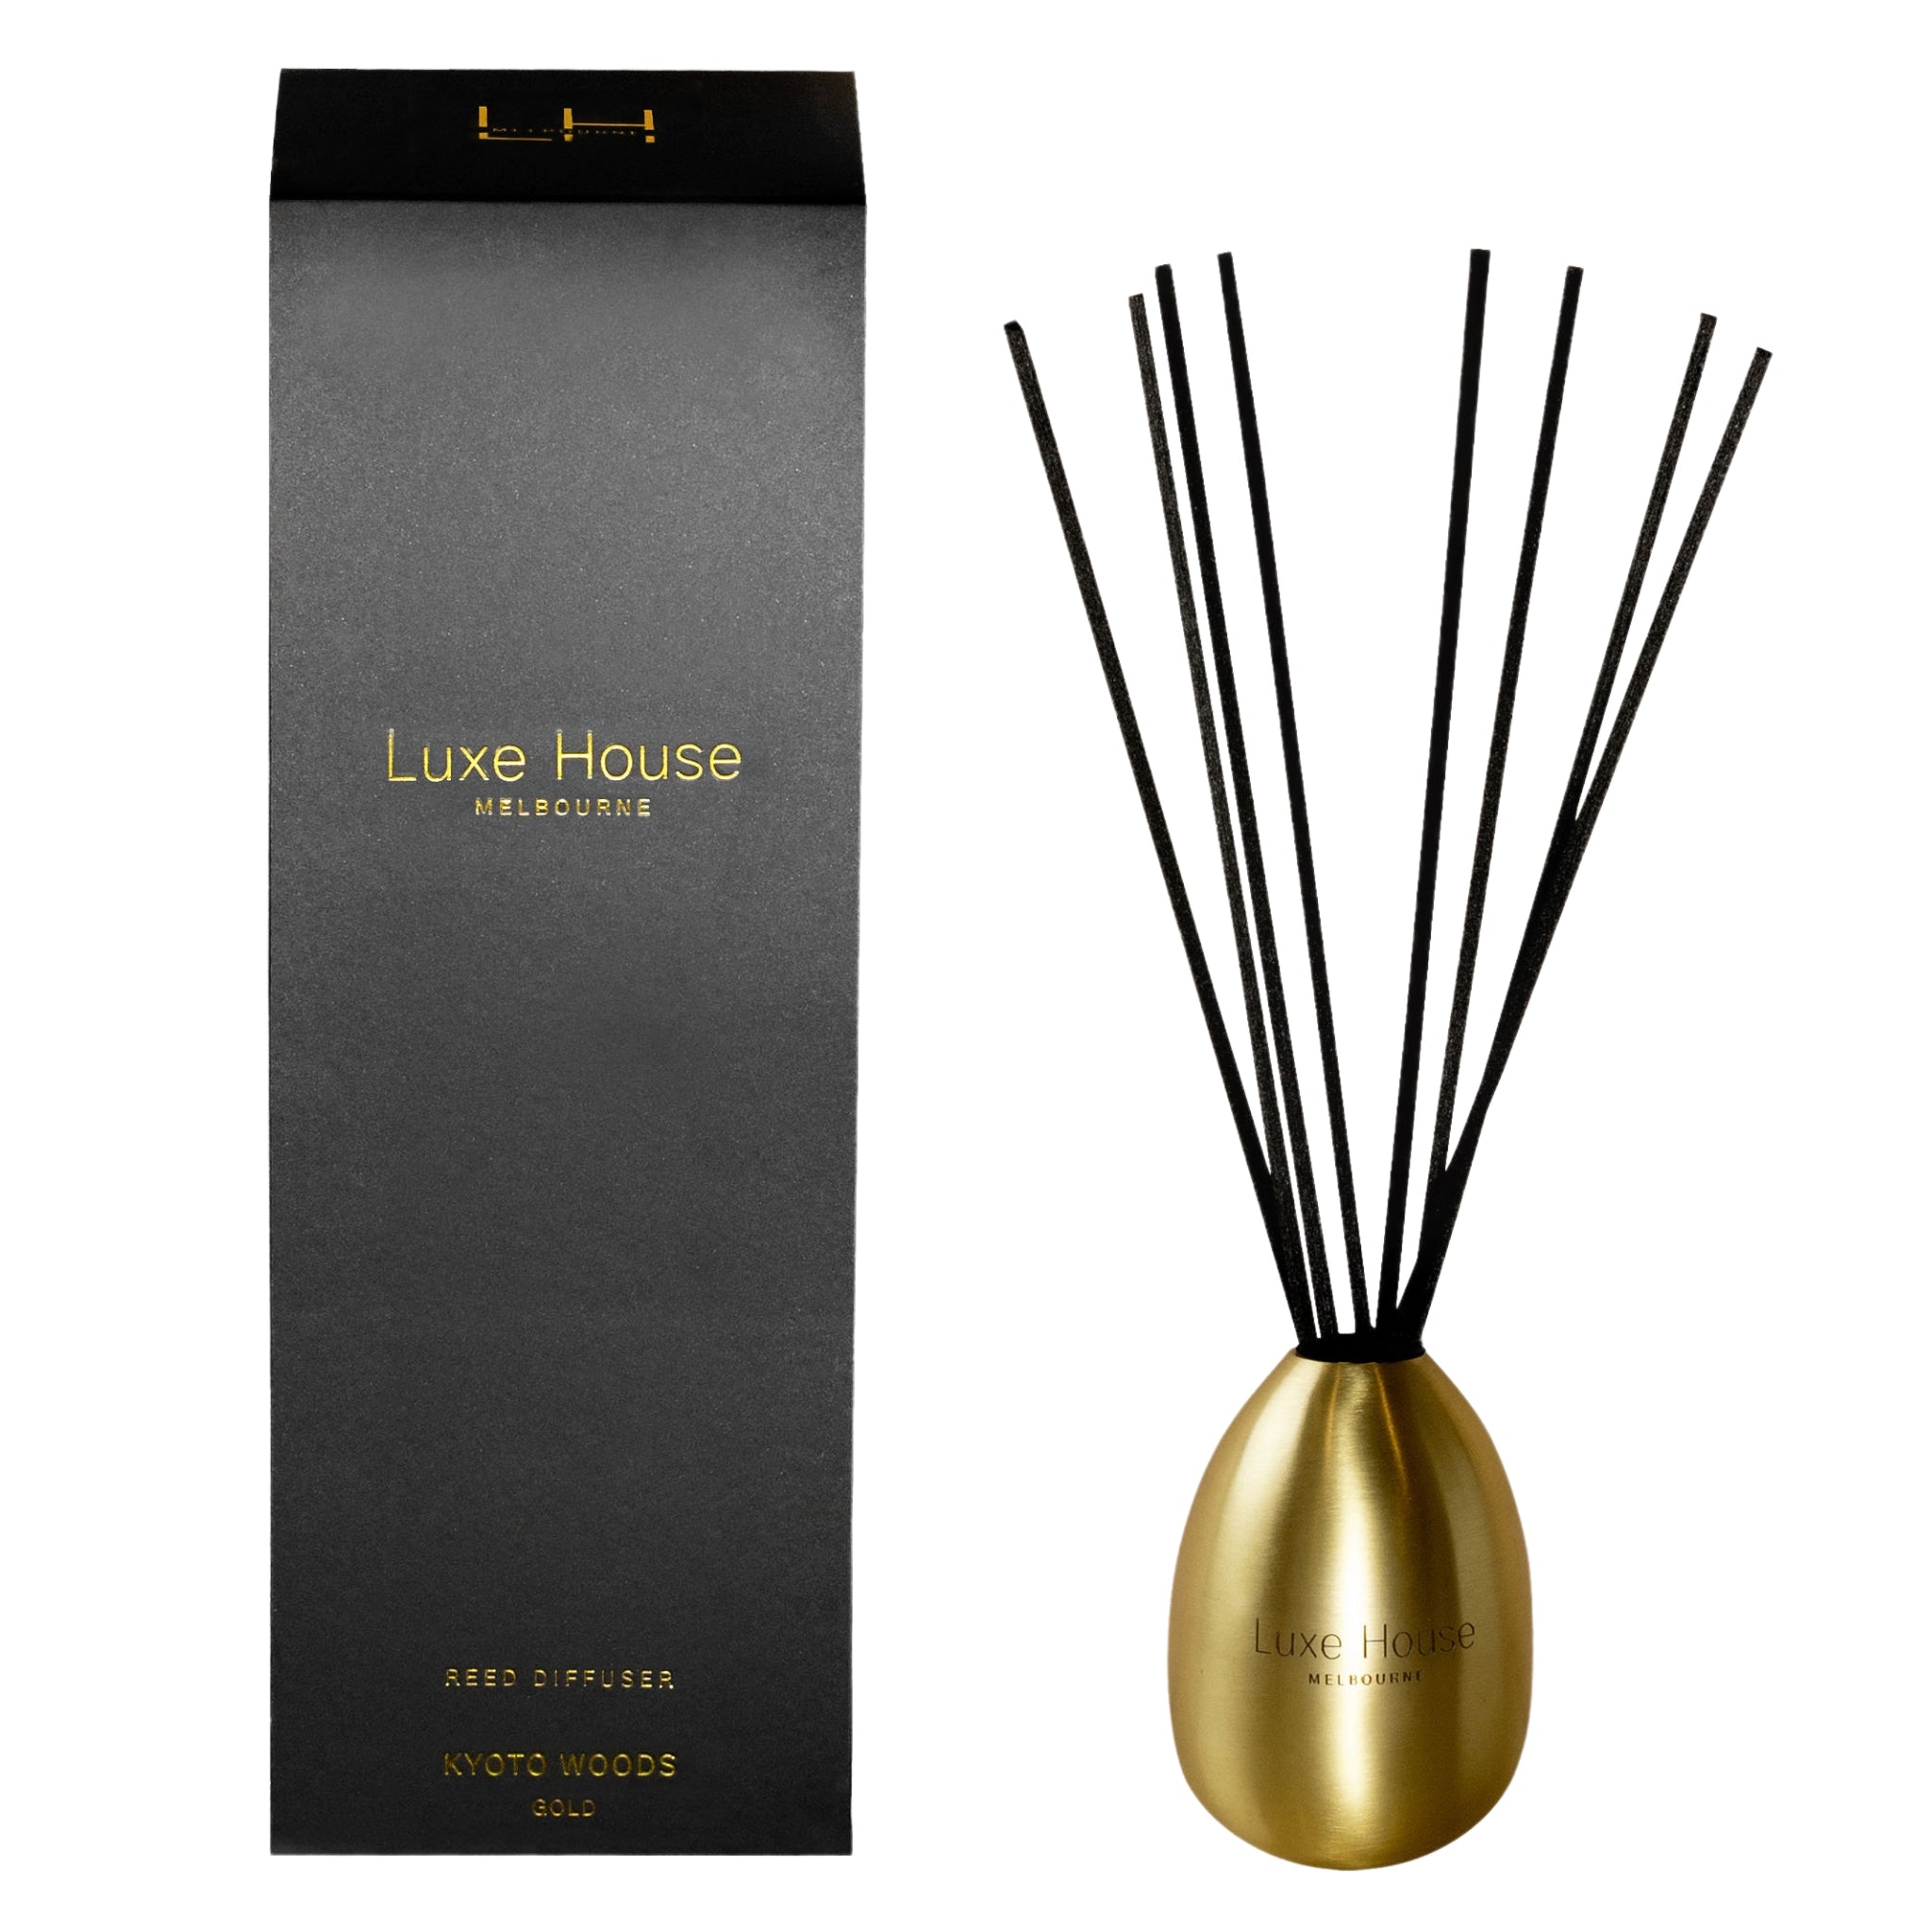 Kyoto Woods Luxury Reed Diffuser